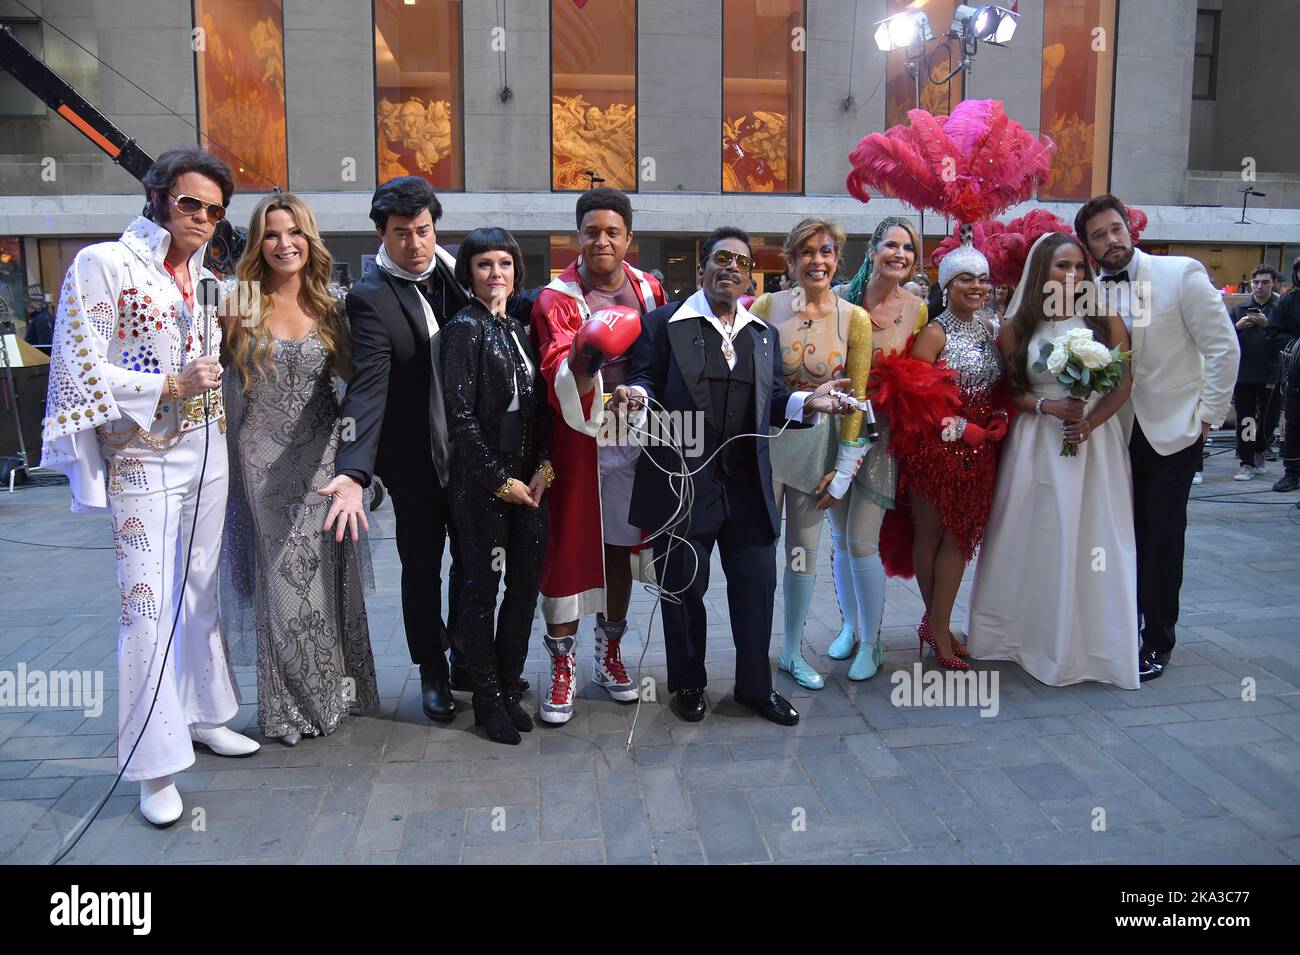 New York, USA. 31st Oct, 2022. (L-R) Willie Geist, Jenna Hager Bush, Carson Daly, Dylan Dreyer, Craig Melvin, Al Roker, Hoda Kotb, Savannah Guthrie, Sheinelle Jones, Kristen Welker and Peter Alexander dress is costumes during The Today Show on Halloween at Rockefeller Plaza, New York, NY, October 31, 2022. (Photo by Anthony Behar/Sipa USA) Credit: Sipa USA/Alamy Live News Stock Photo